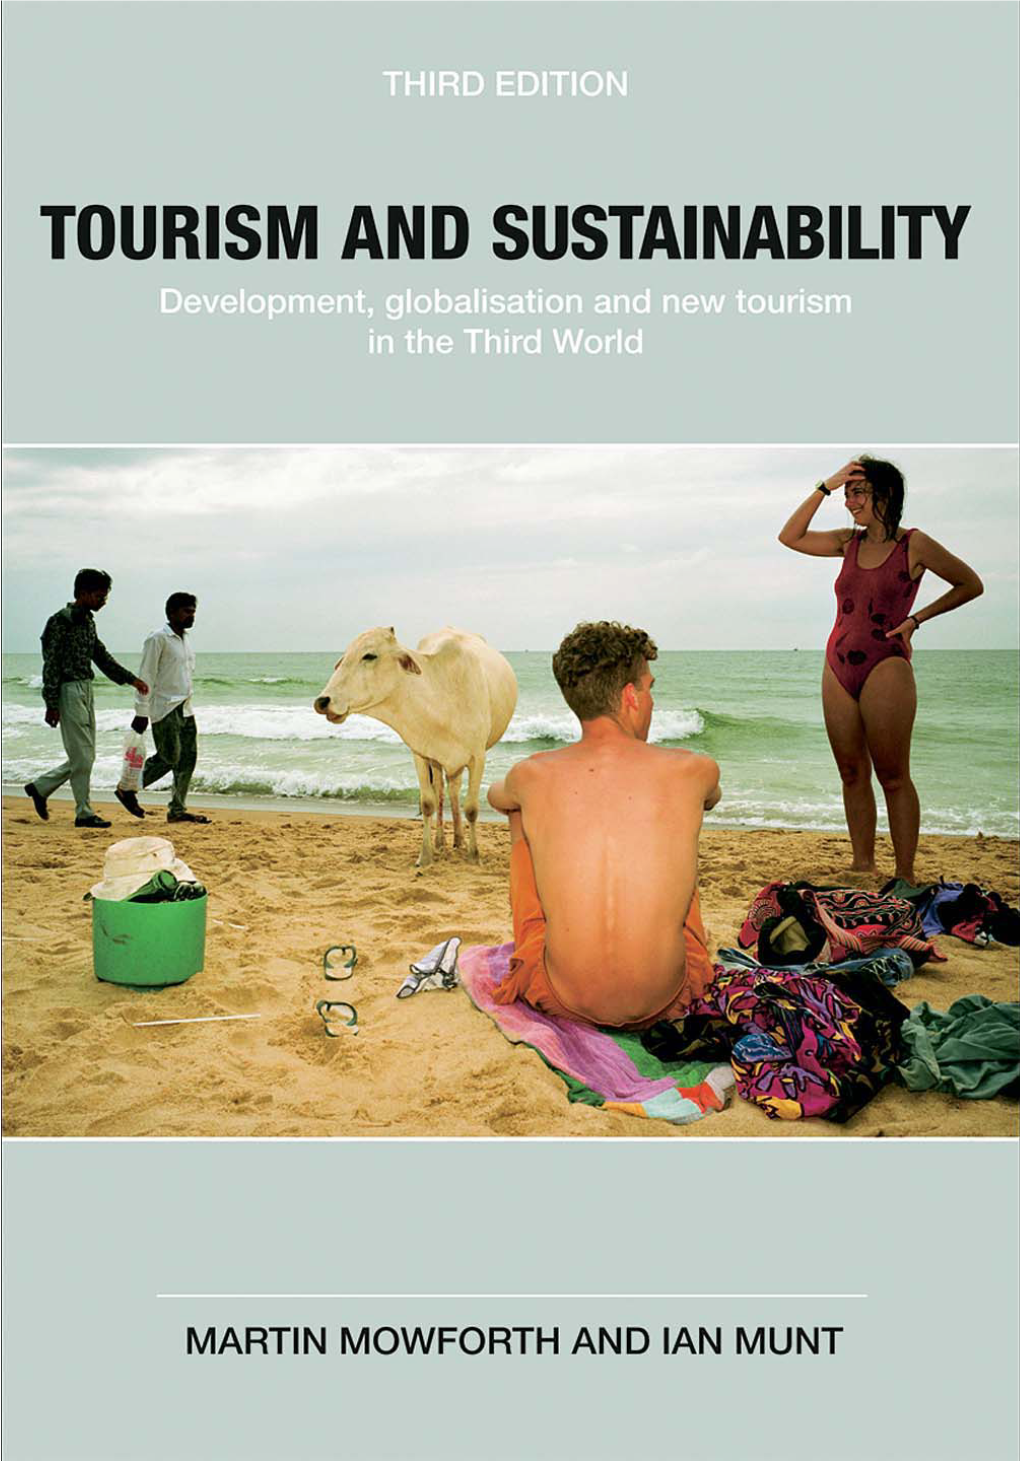 Tourism and Sustainability: Development Globalisation and New Tourism in the Third World, Third Edition